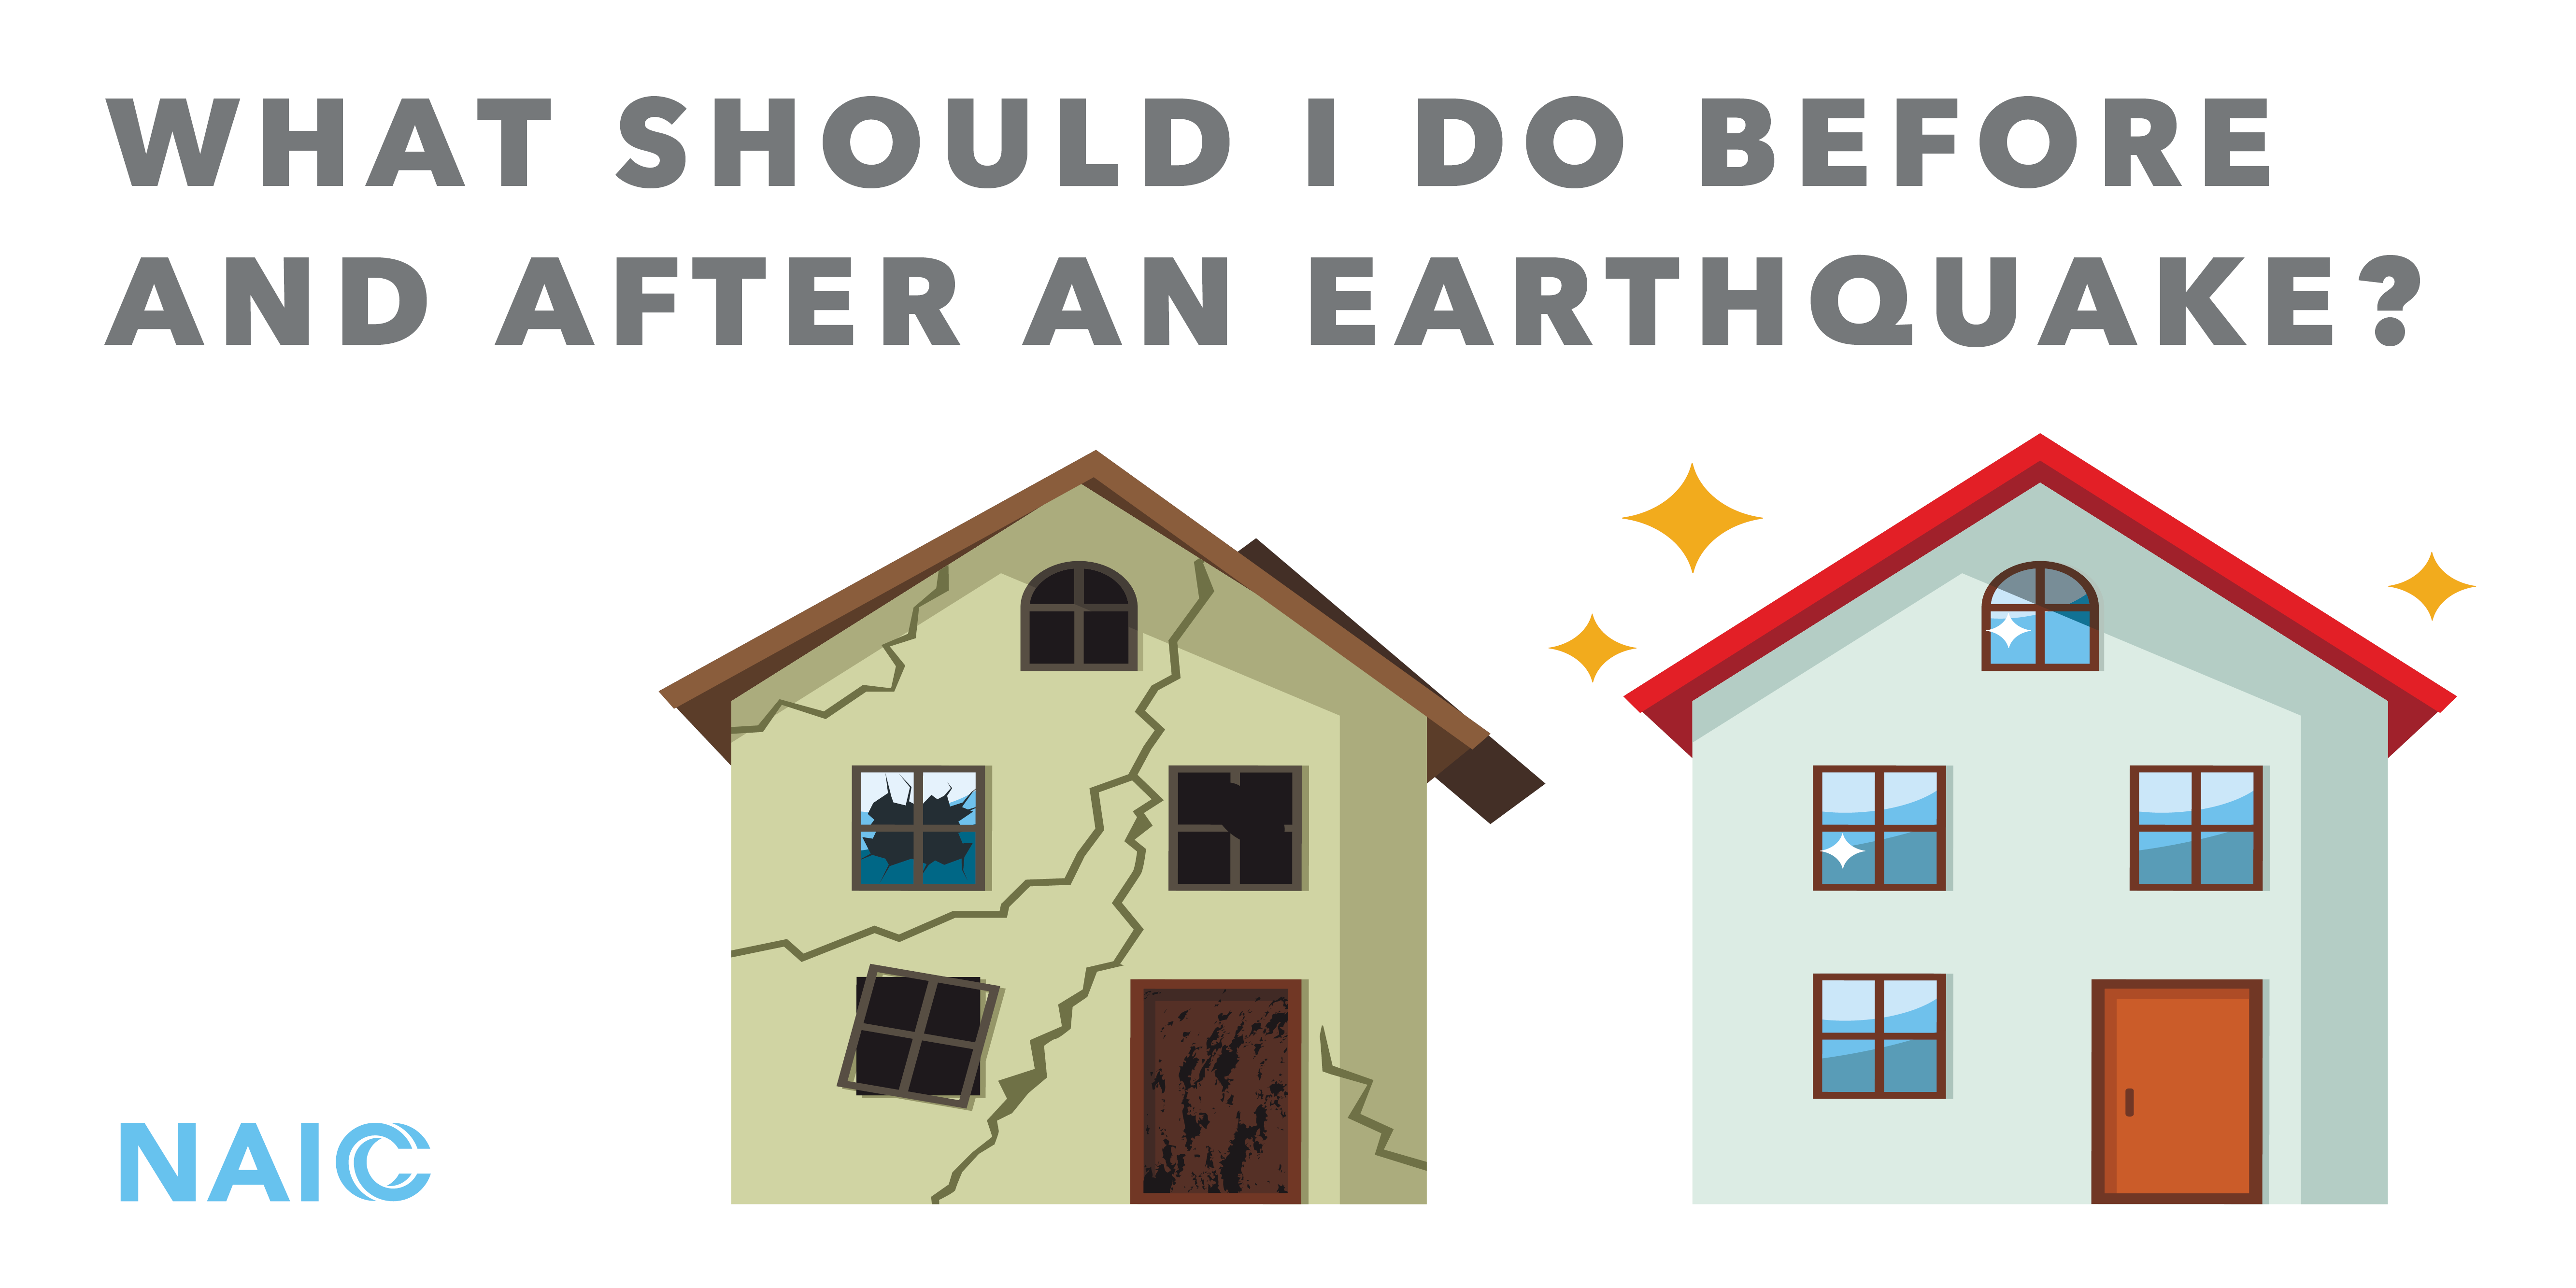 What Should I do Before and After an Earthquake. Two houses next to each other are depicted. One house, on the left, has earthquake damage. The other house, on the right, is undamaged. The NAIC logo is in the bottom left of the image. 